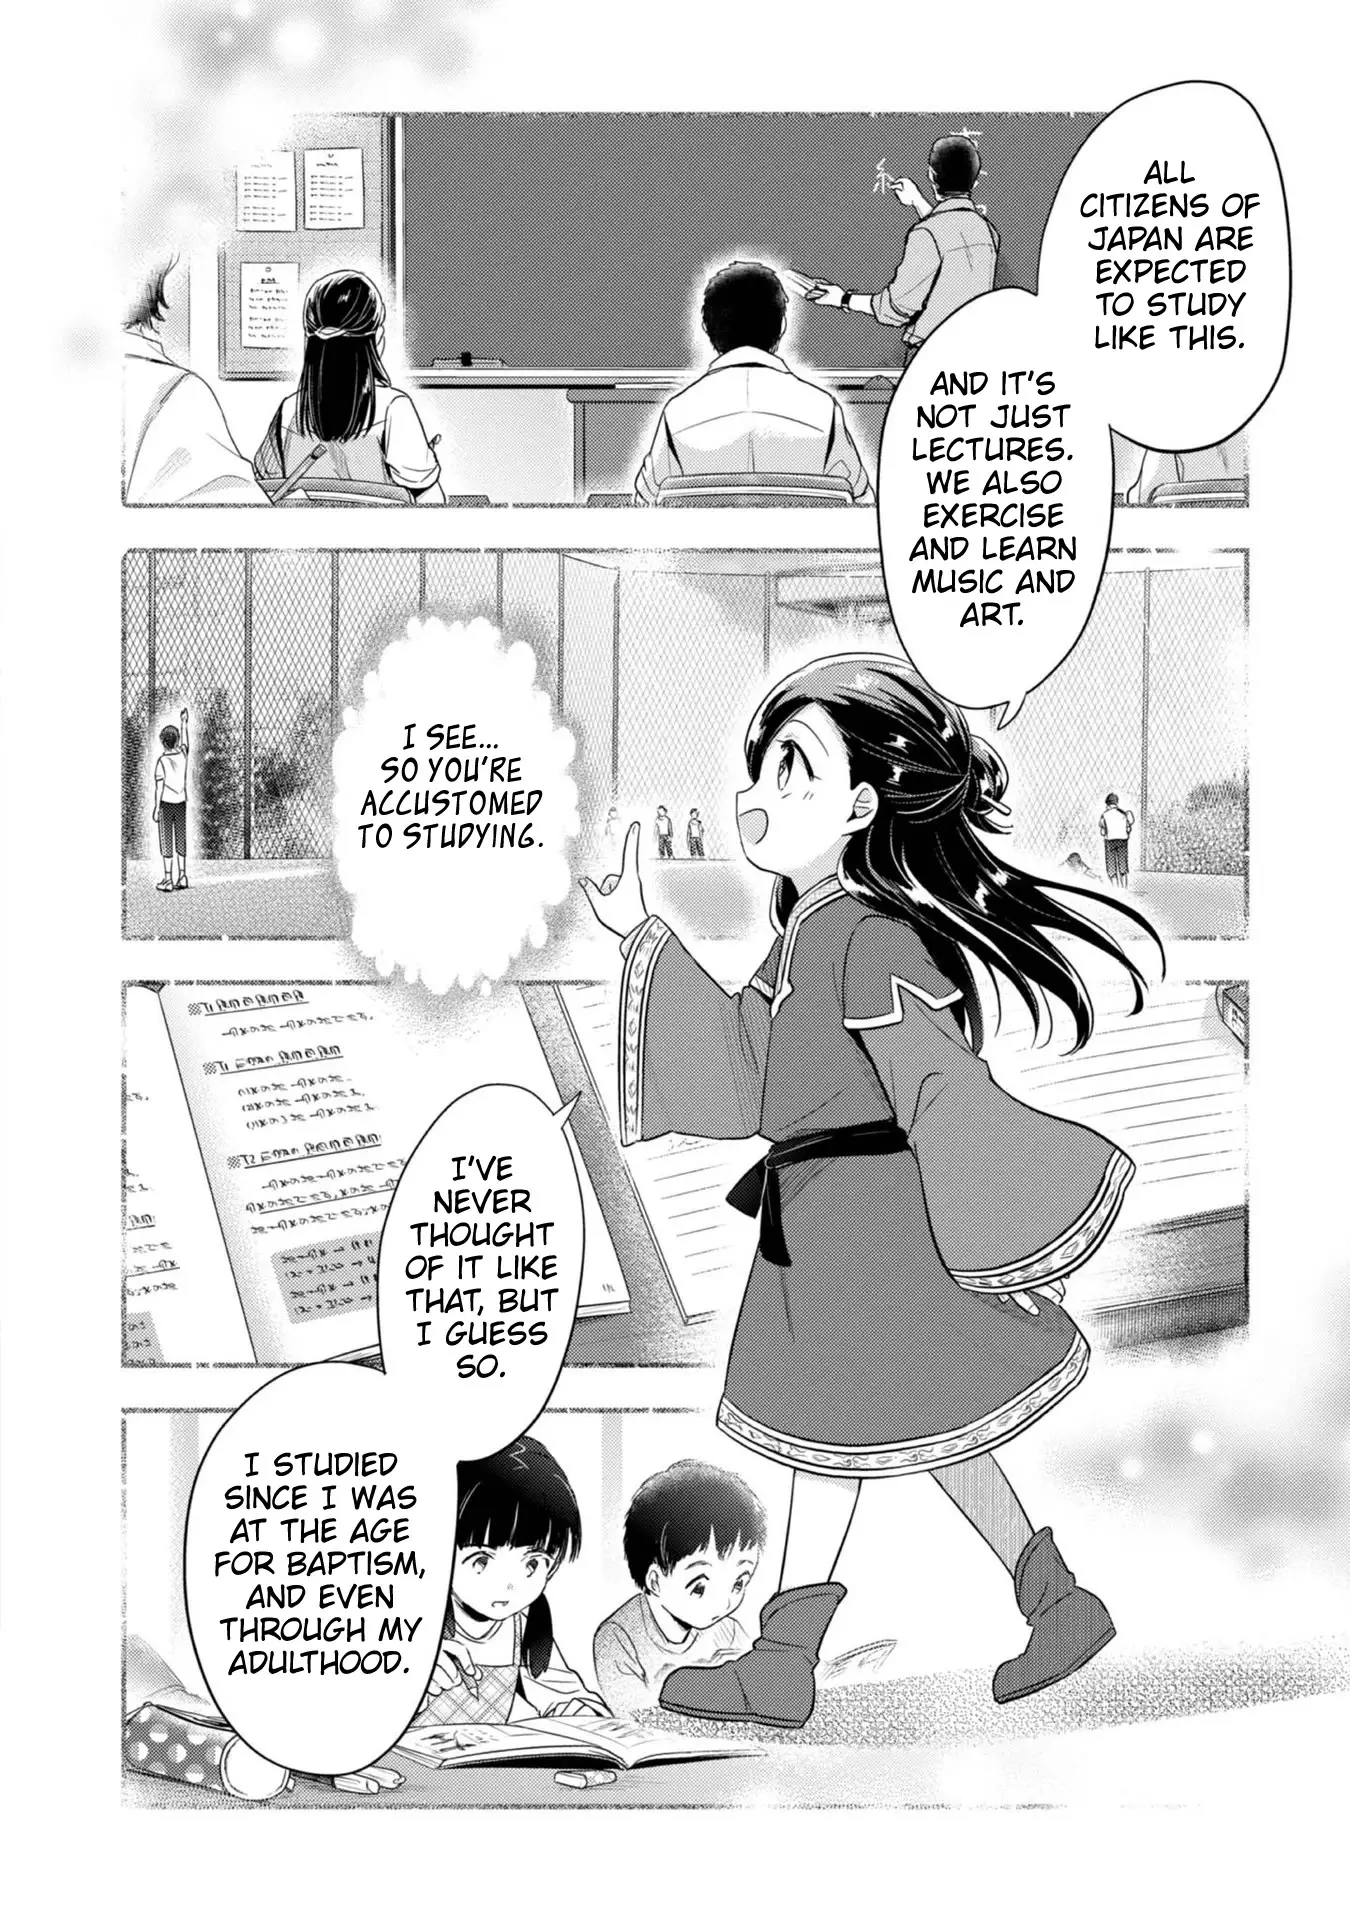 Ascendance Of A Bookworm ~I'll Do Anything To Become A Librarian~ Part 2 「I'll Become A Shrine Maiden For Books!」 - 38 page 23-cc054b28